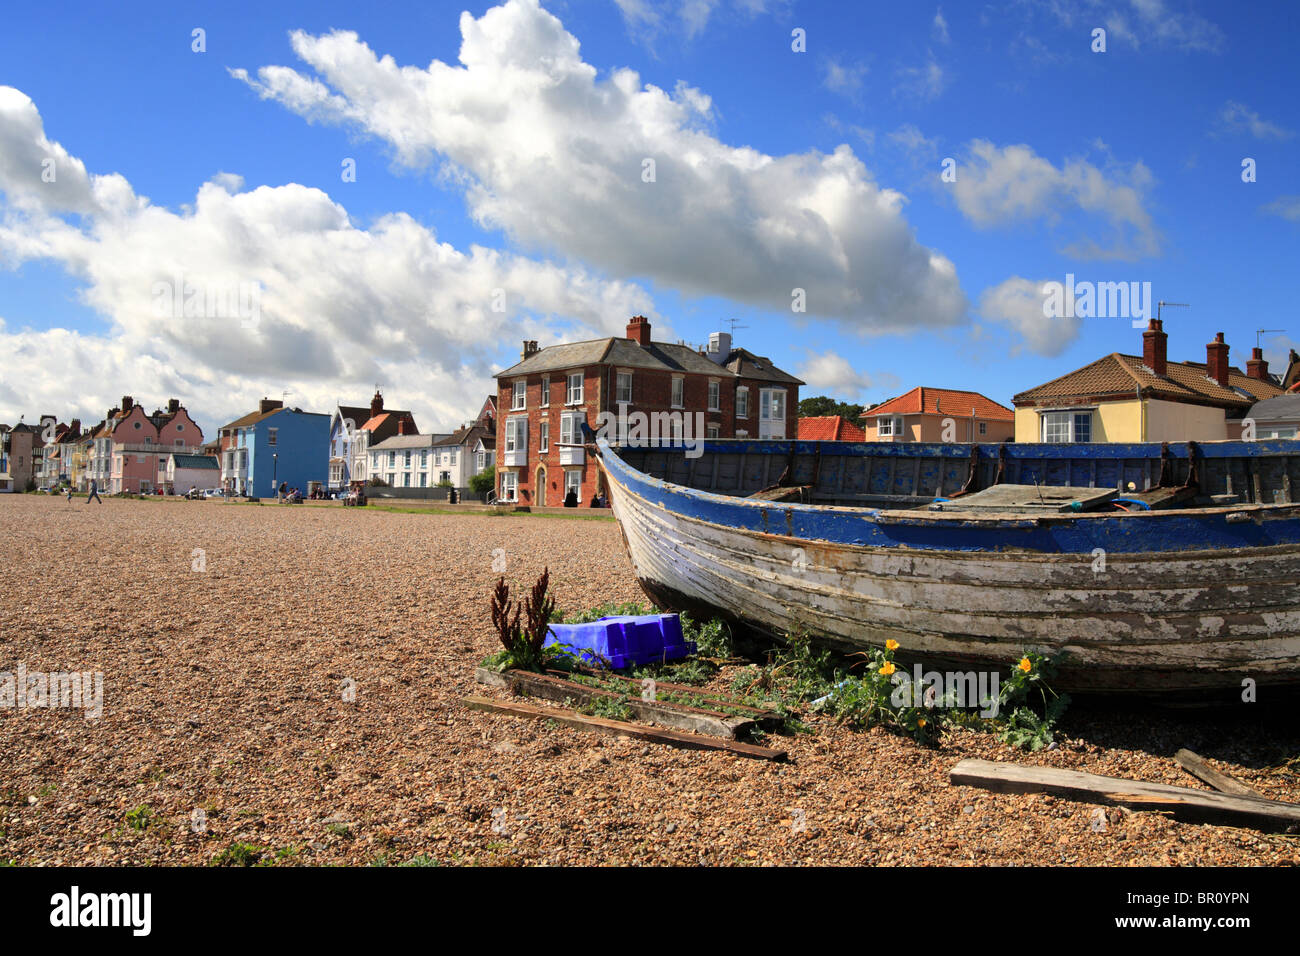 Fishing boat on Aldeburgh beach in front of the row of colourful town houses. Summers day in Suffolk East Anglia. Stock Photo